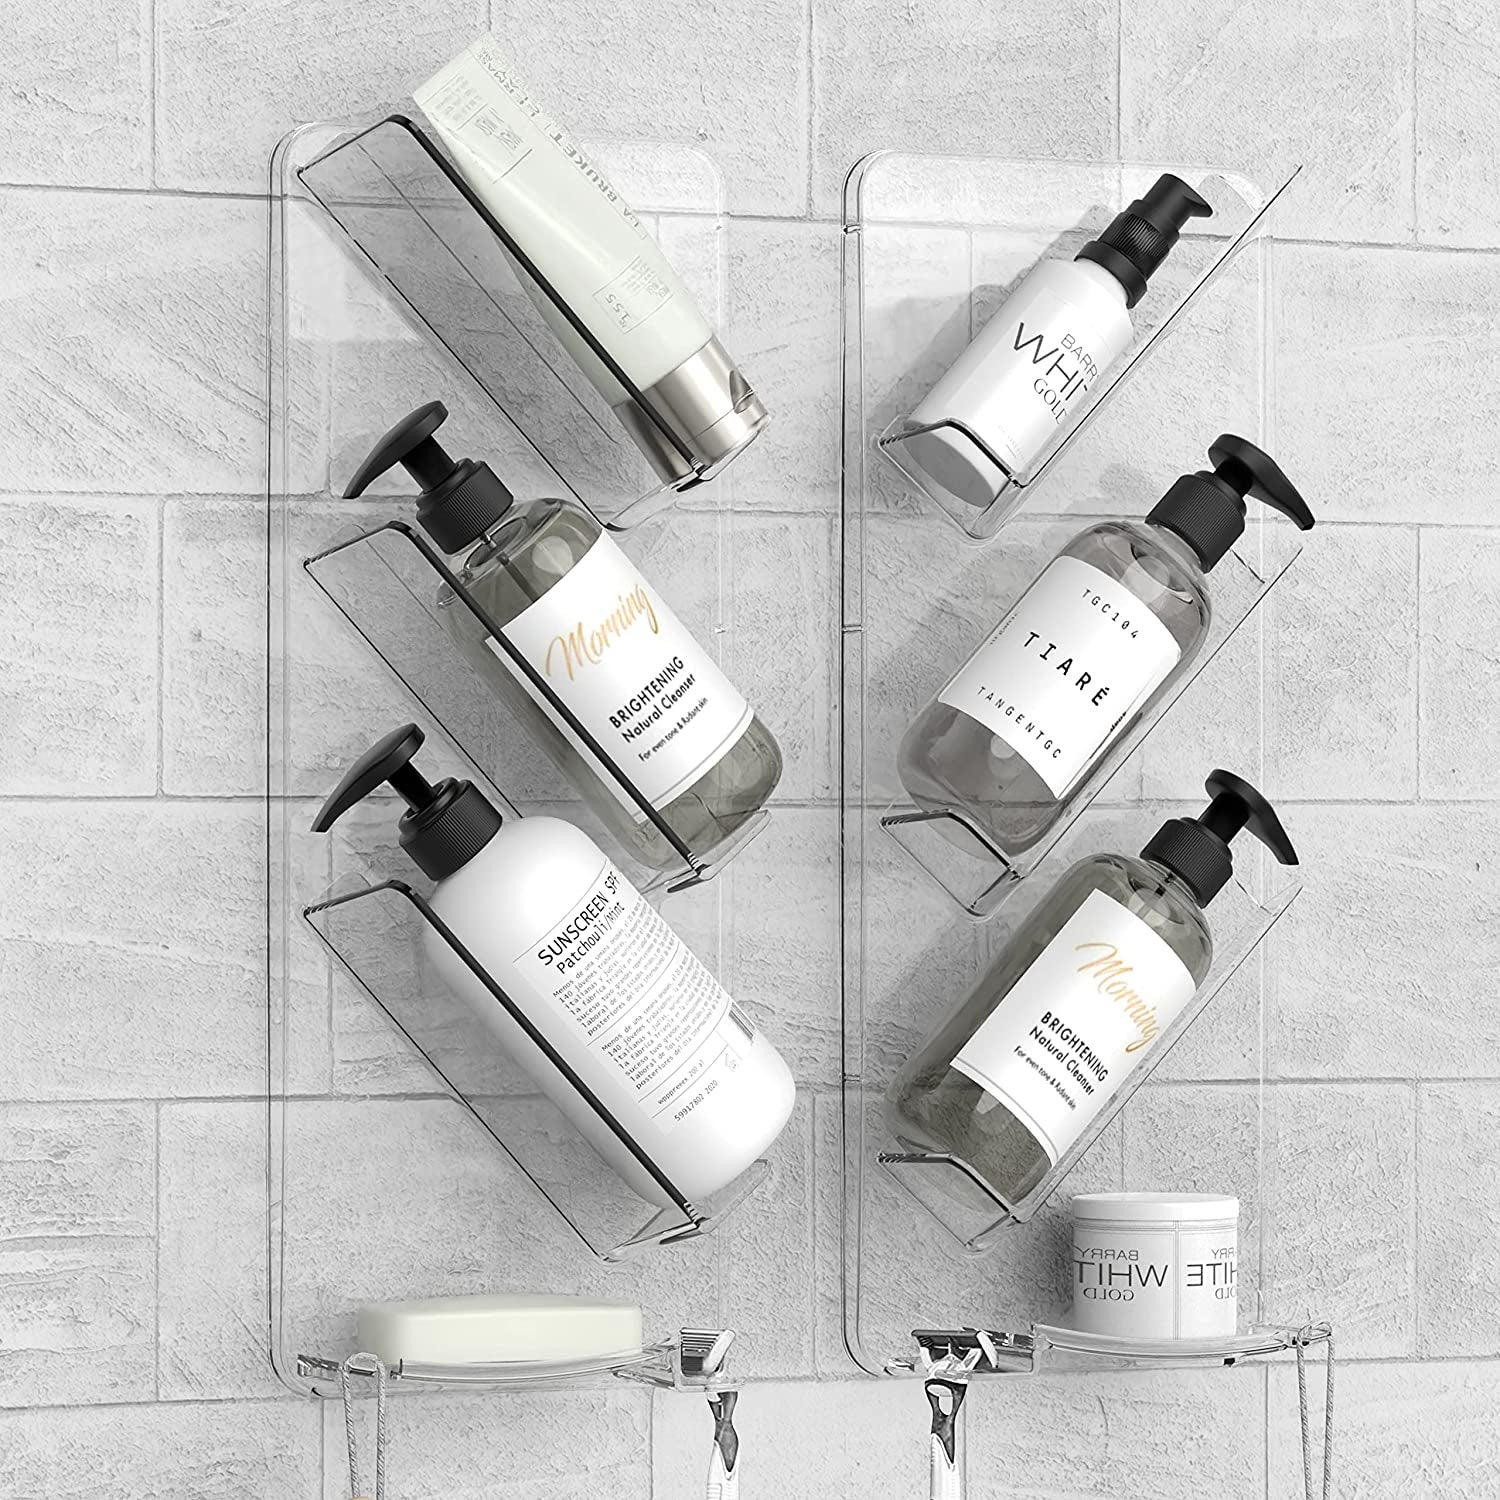 A set of six small clear shelves attached to a shower wall, tilted diagonally to each hold a bottle of shampoo 